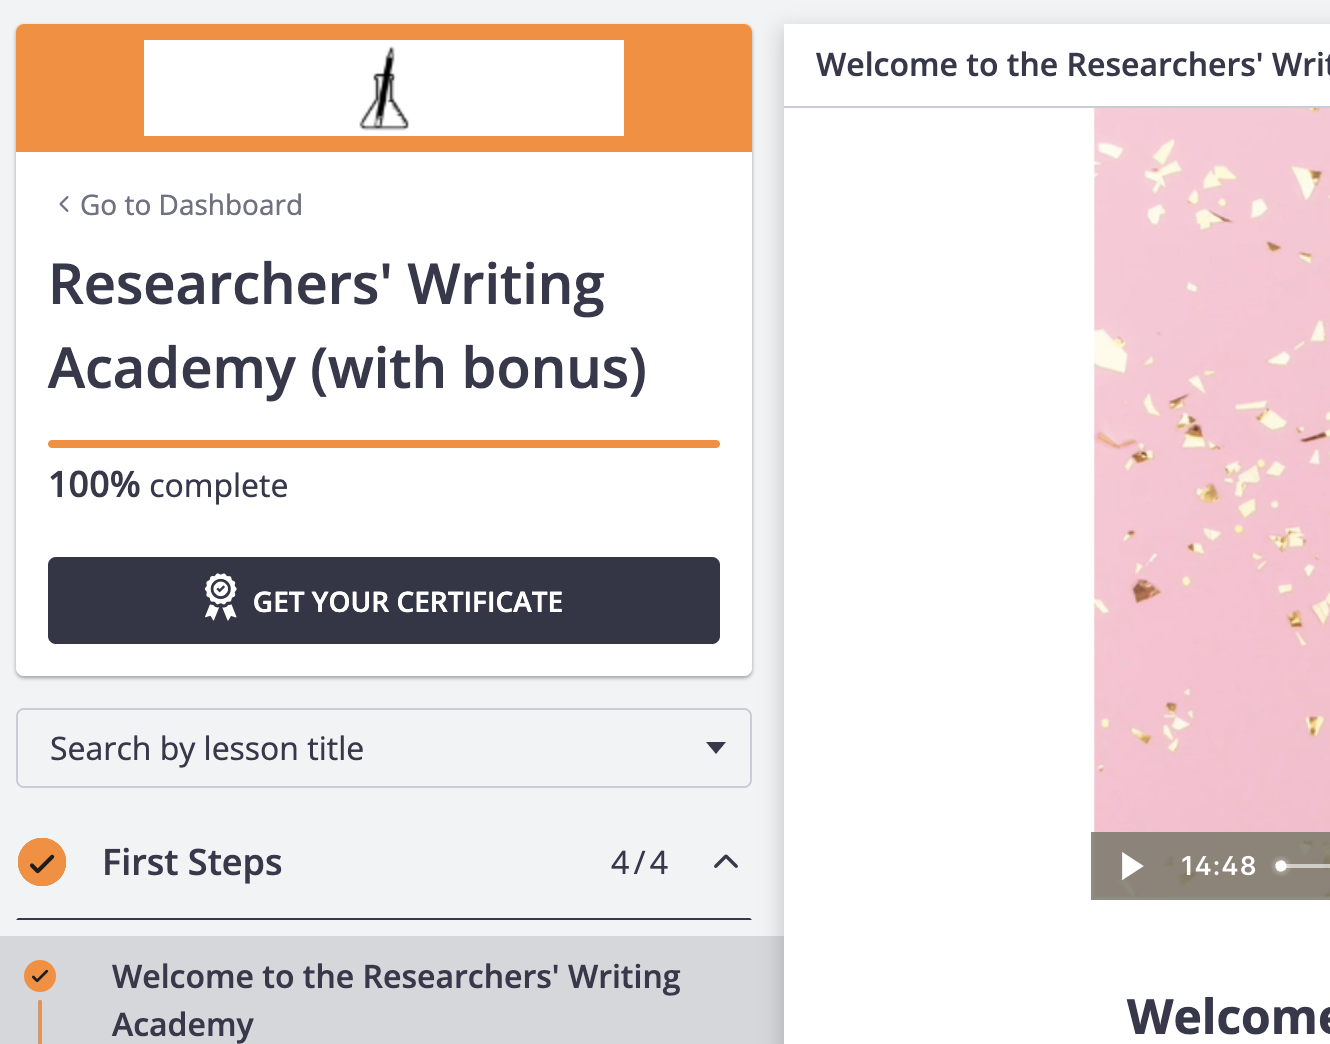 Screenshot of the Researchers' Writing Academy course on Thinkific completed to 100%